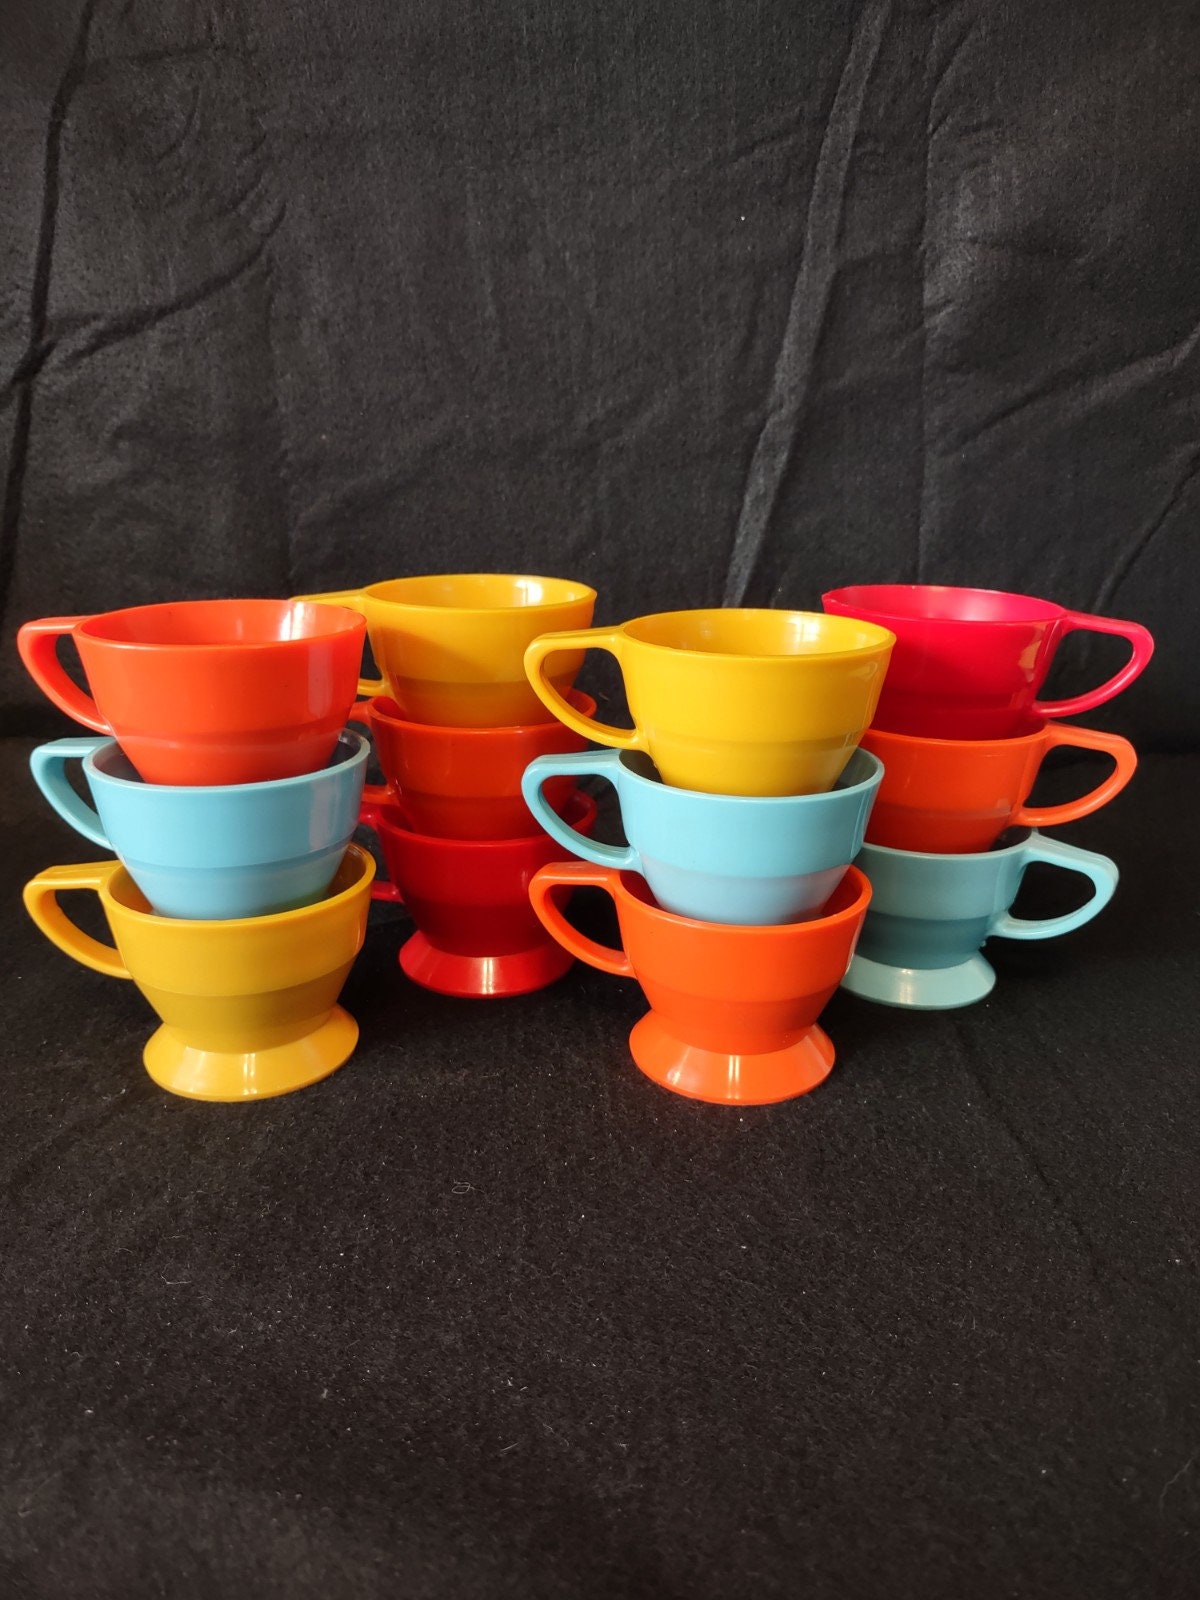 Vintage Set of 6 Yellow Plastic Solo Cozy Cups w/ Liners Drink Camping Tea